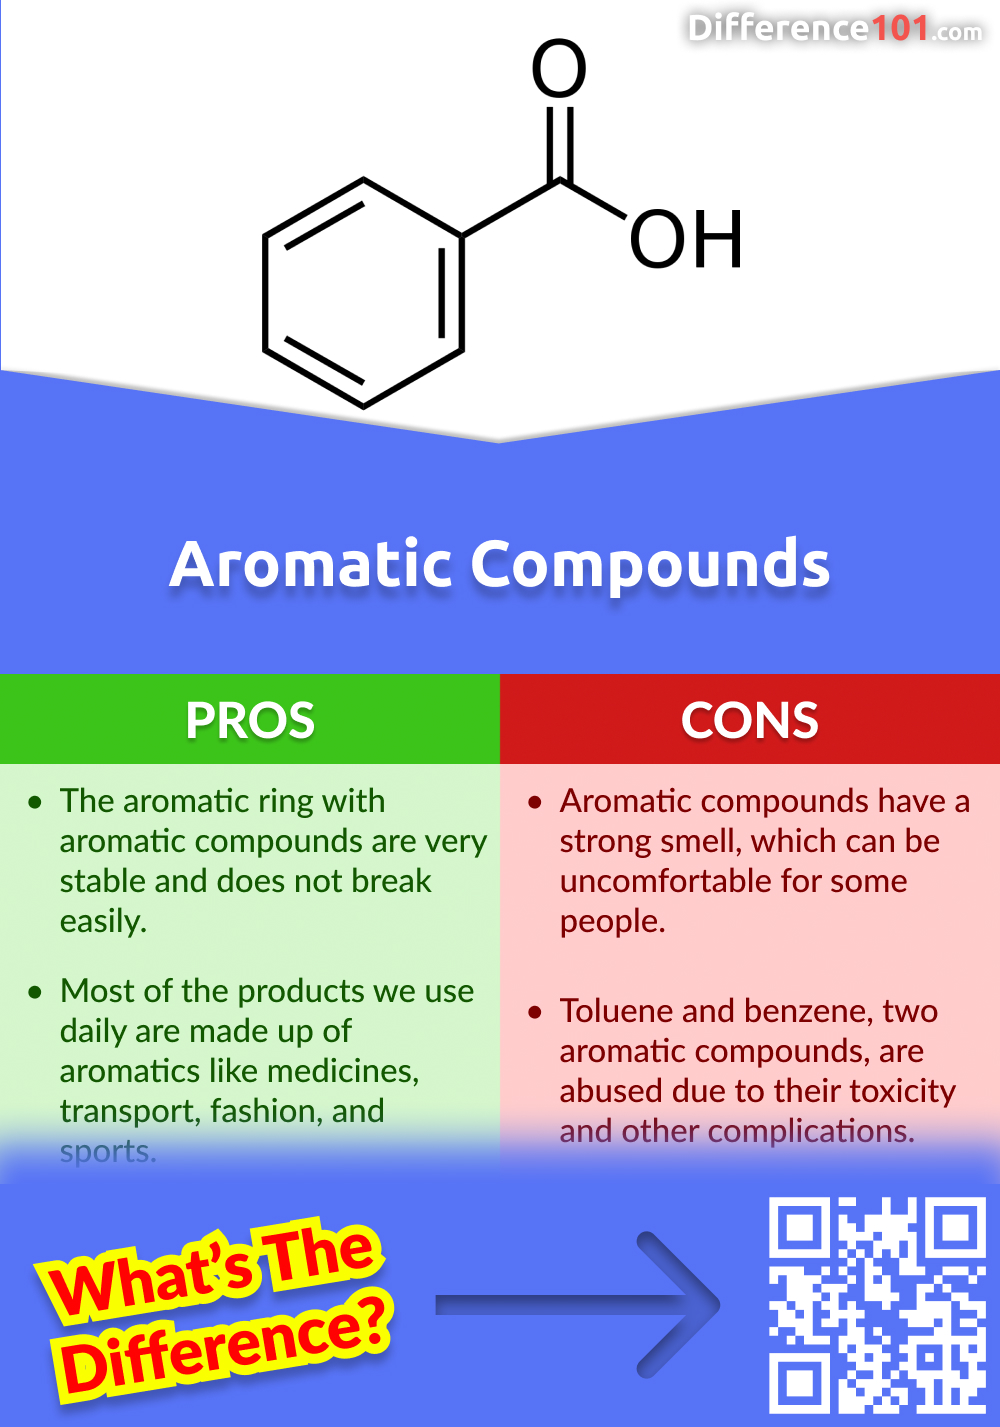 Aromatic compounds Pros and Cons